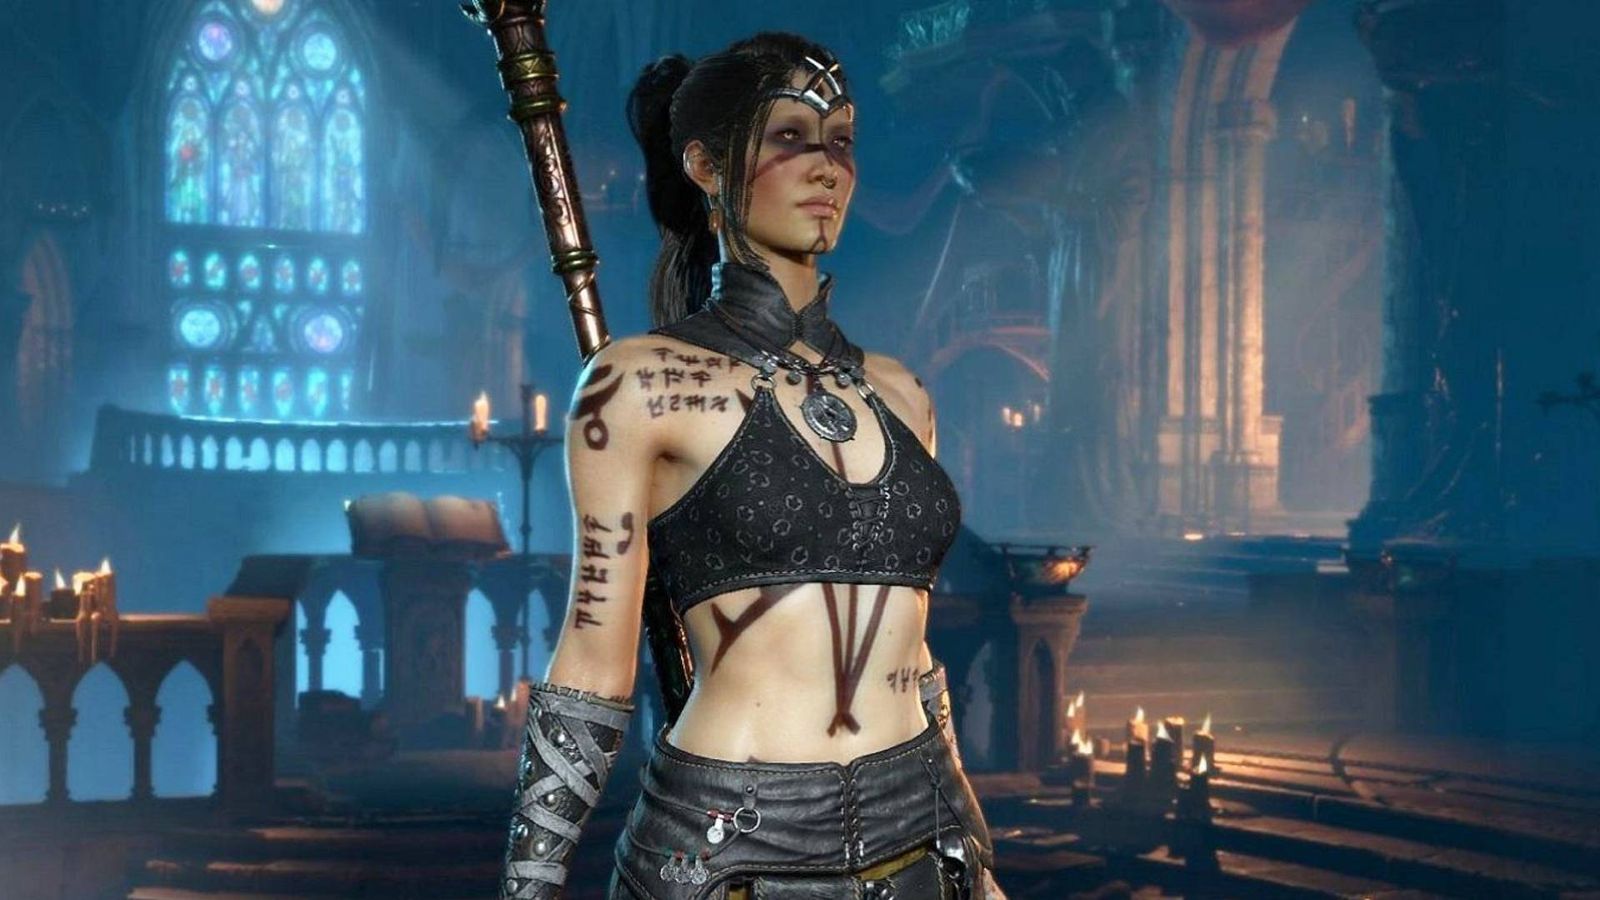 Diablo 4 error code 7 - An image of a female character in the game